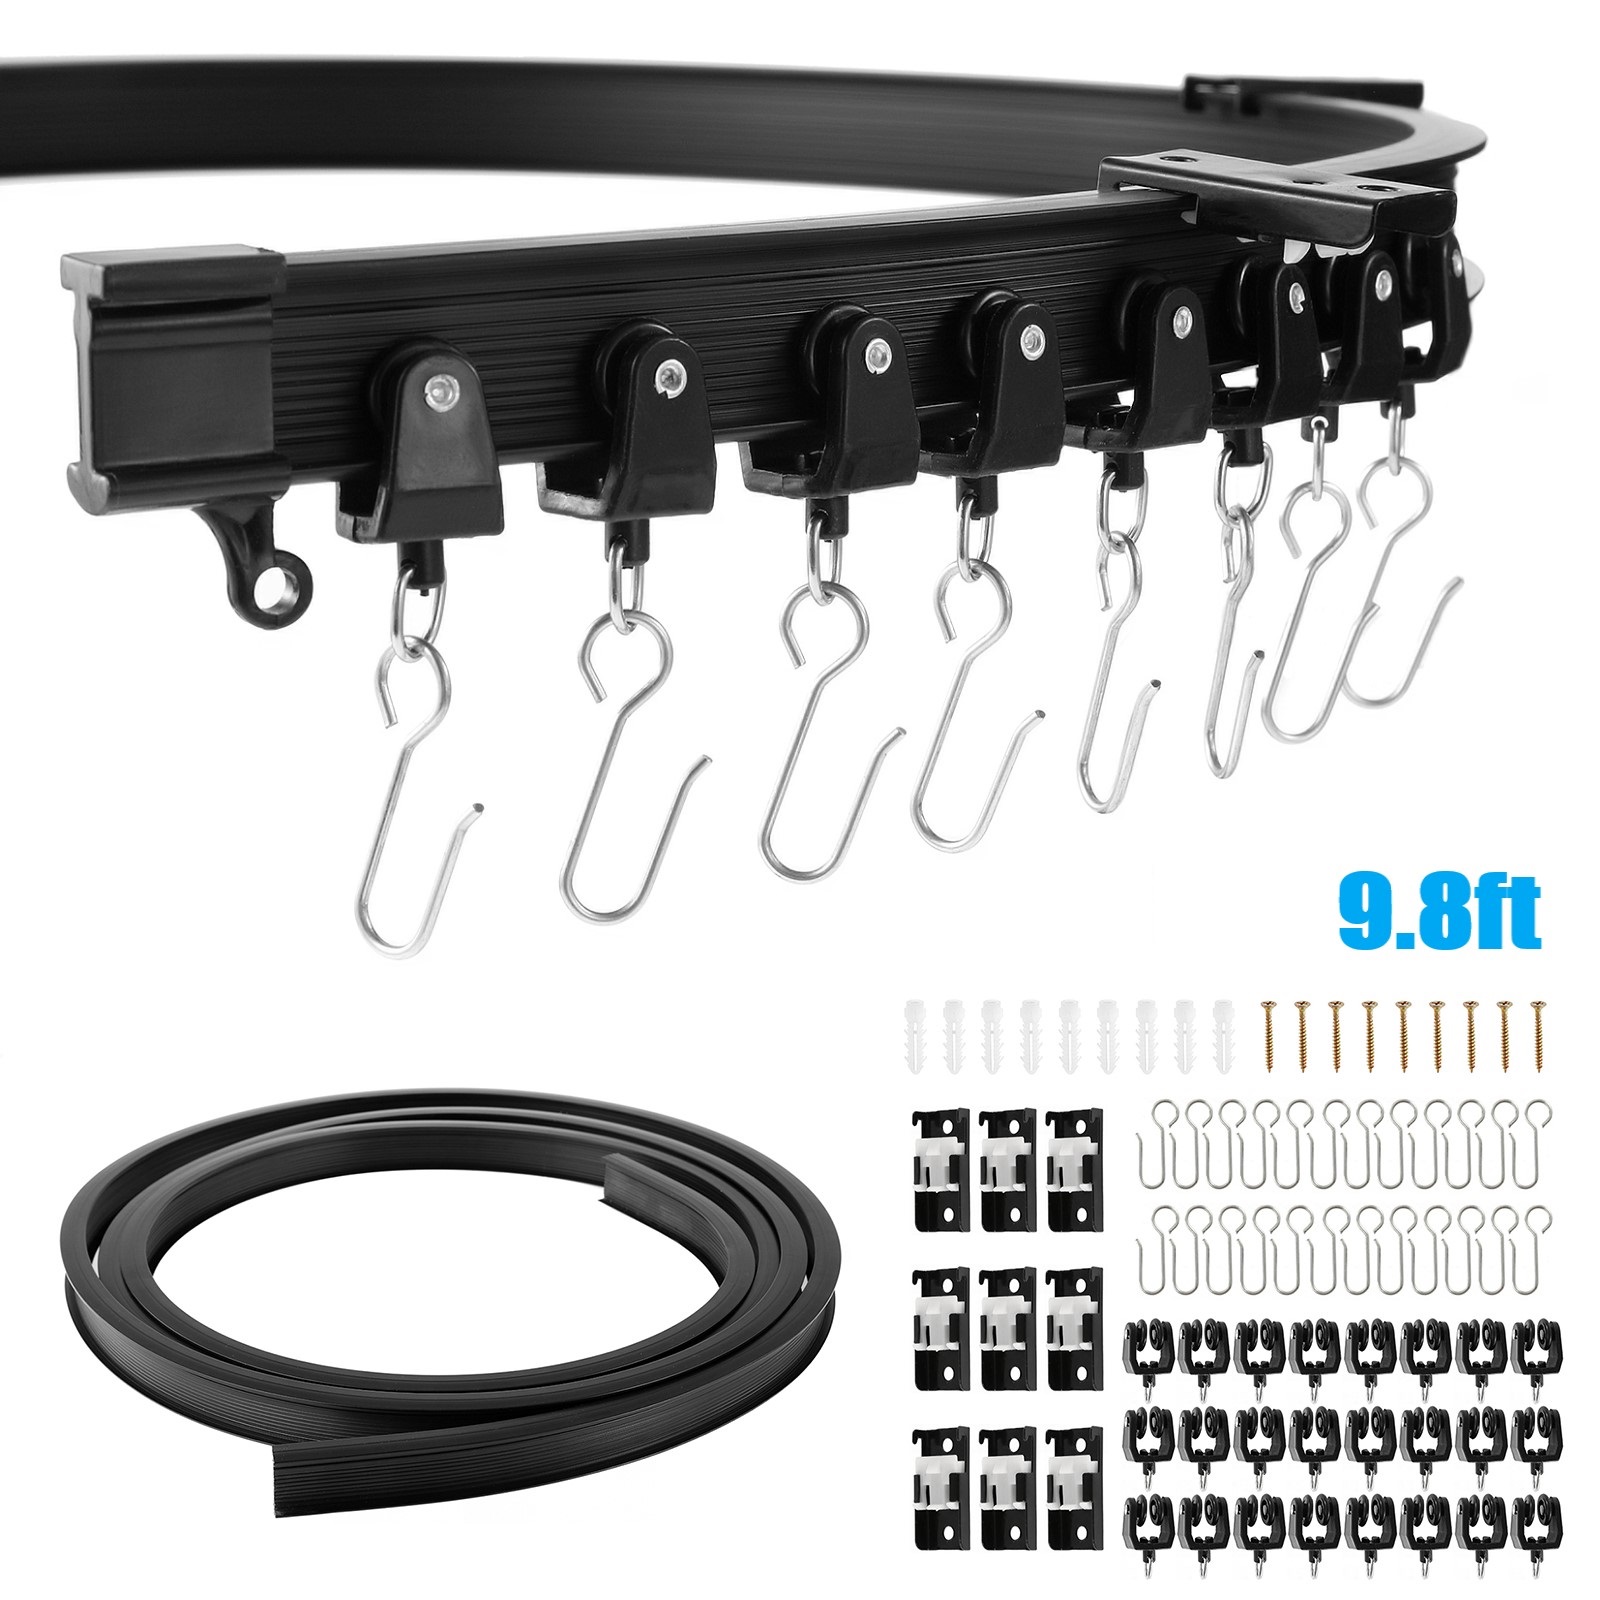 Flexible Bendable Ceiling Curtain Track, Black Curved Ceiling Mount Curtain Rail with Hooks & Accessories Set (3m/9.8ft) - image 1 of 8